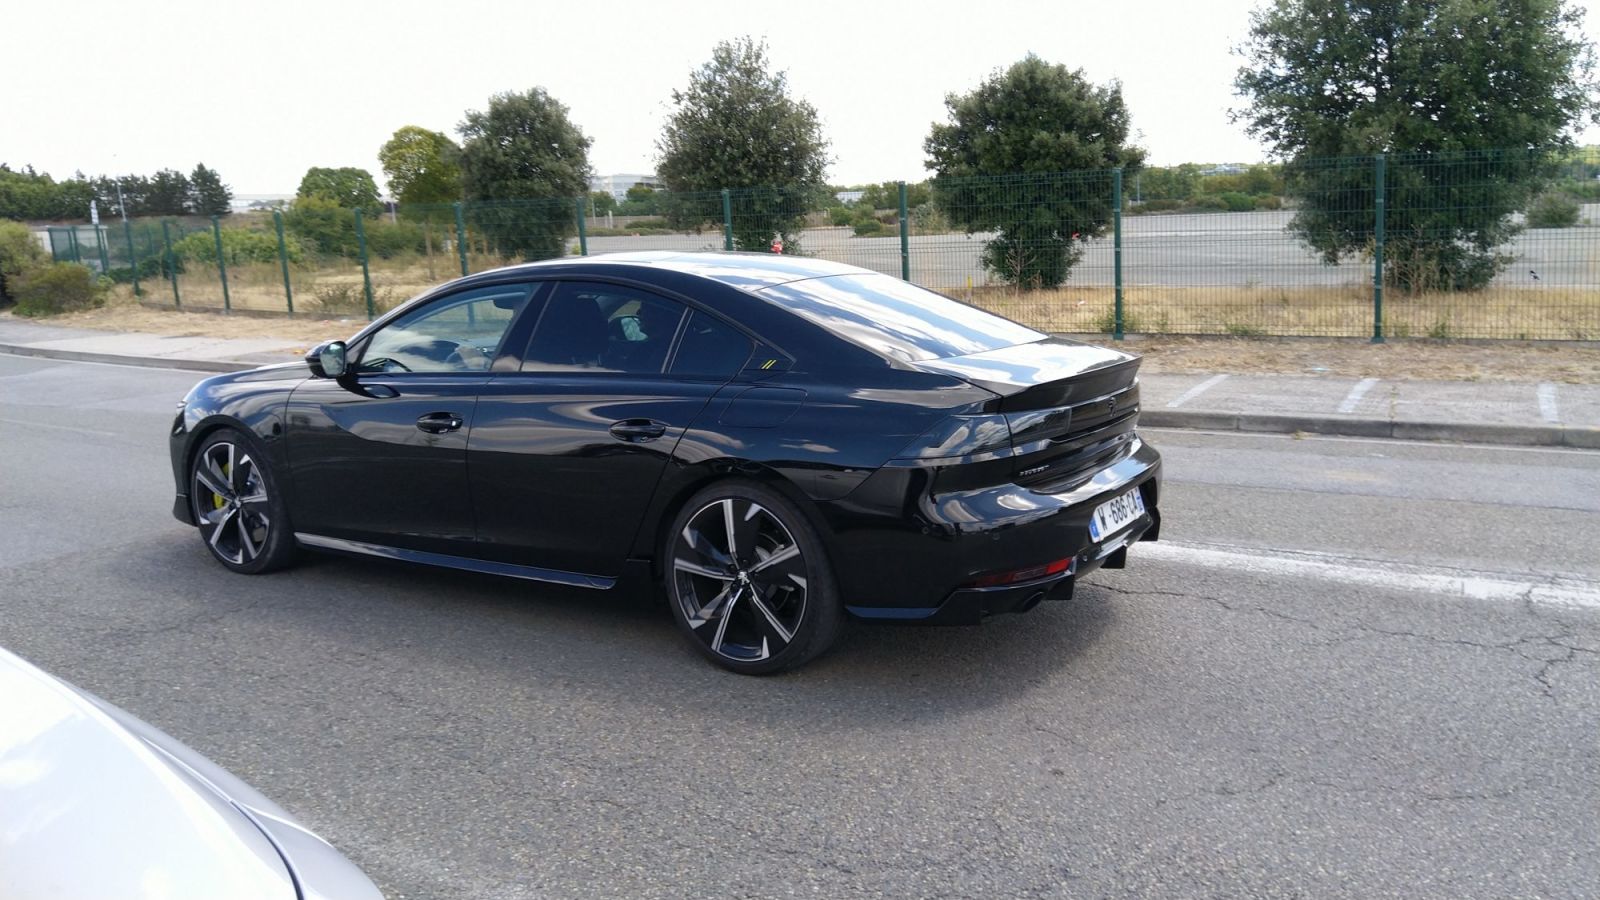 Illustration for article titled Pre-production Peugeot 508 PSE (Peugeot Sport Engineered) spotted